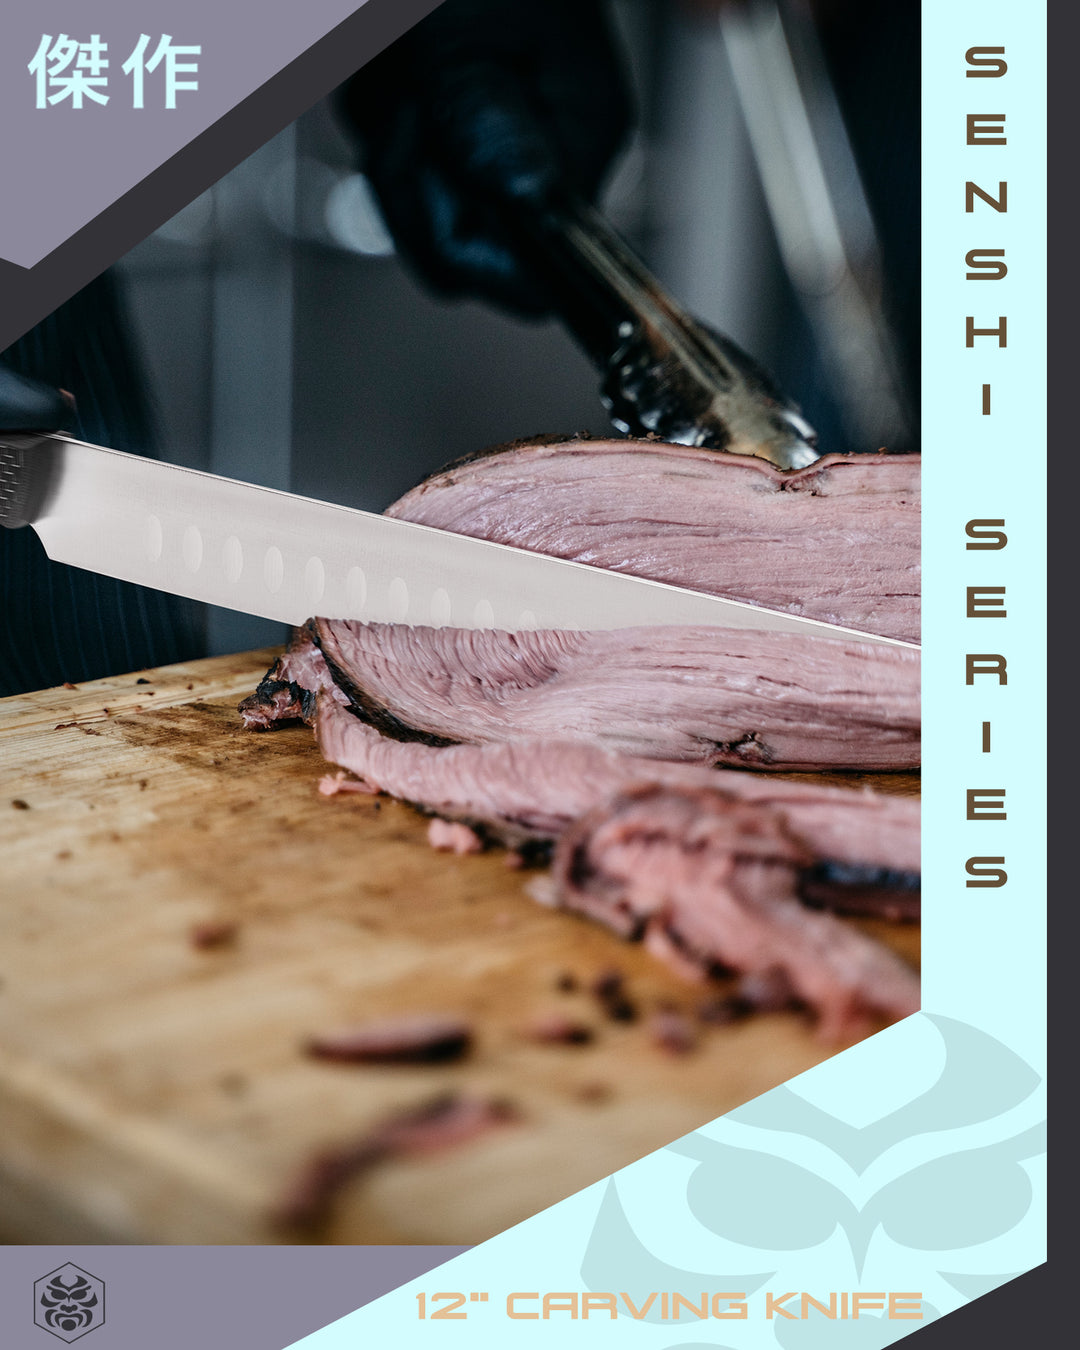 A pitmaster slices a large brisket with the Senshi Carving Knife